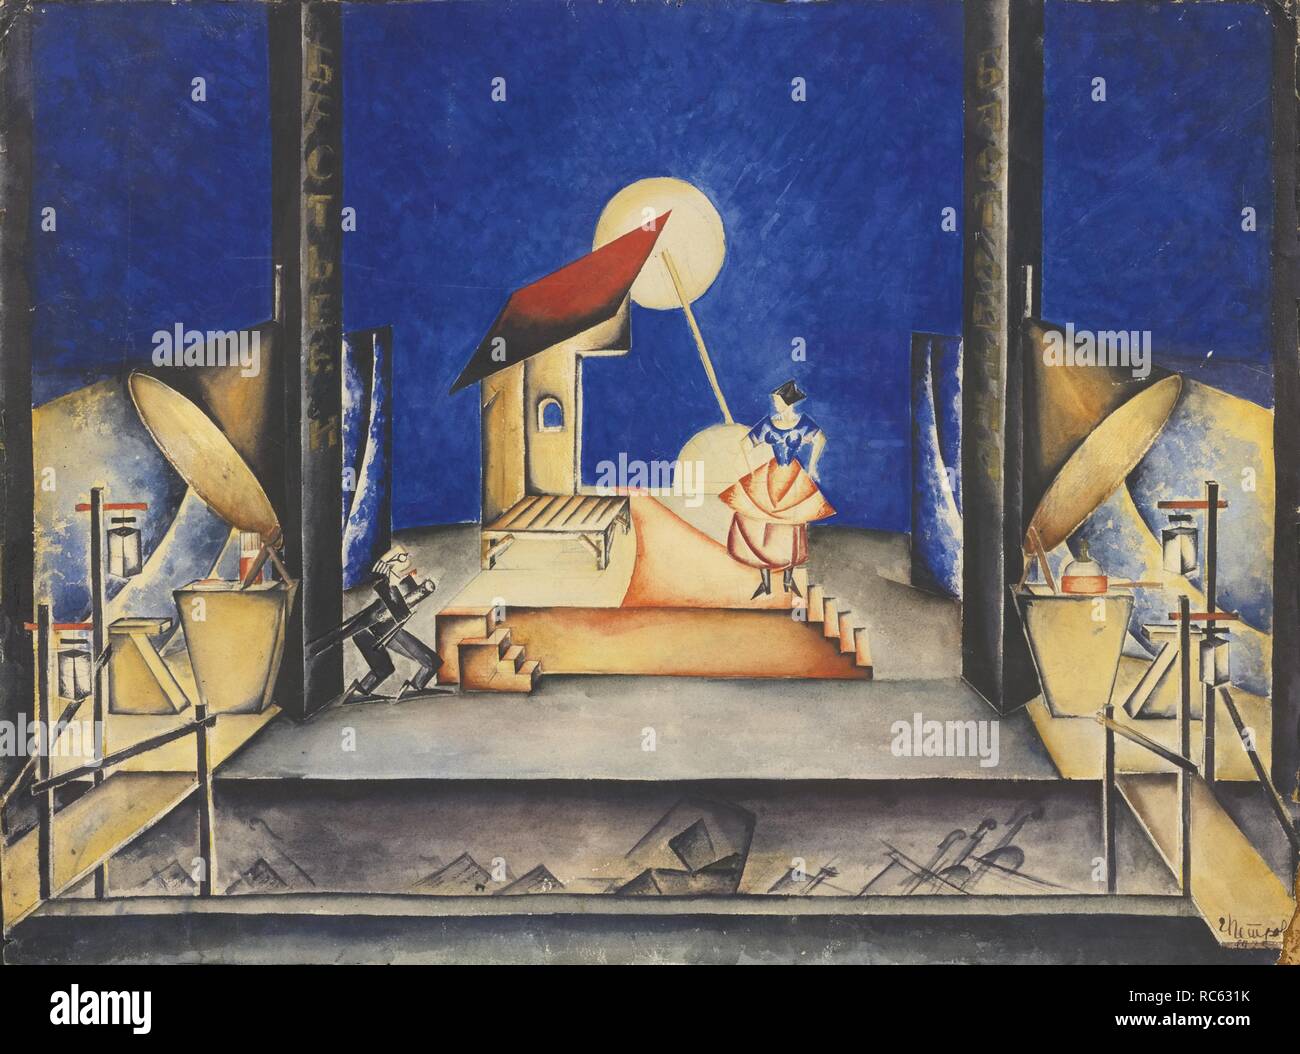 Stage design for the Opera 'Bastien und Bastienne' by W. A. Mozart. Museum: PRIVATE COLLECTION. Author: Petrova-Troitskaya, Ekaterina. Stock Photo